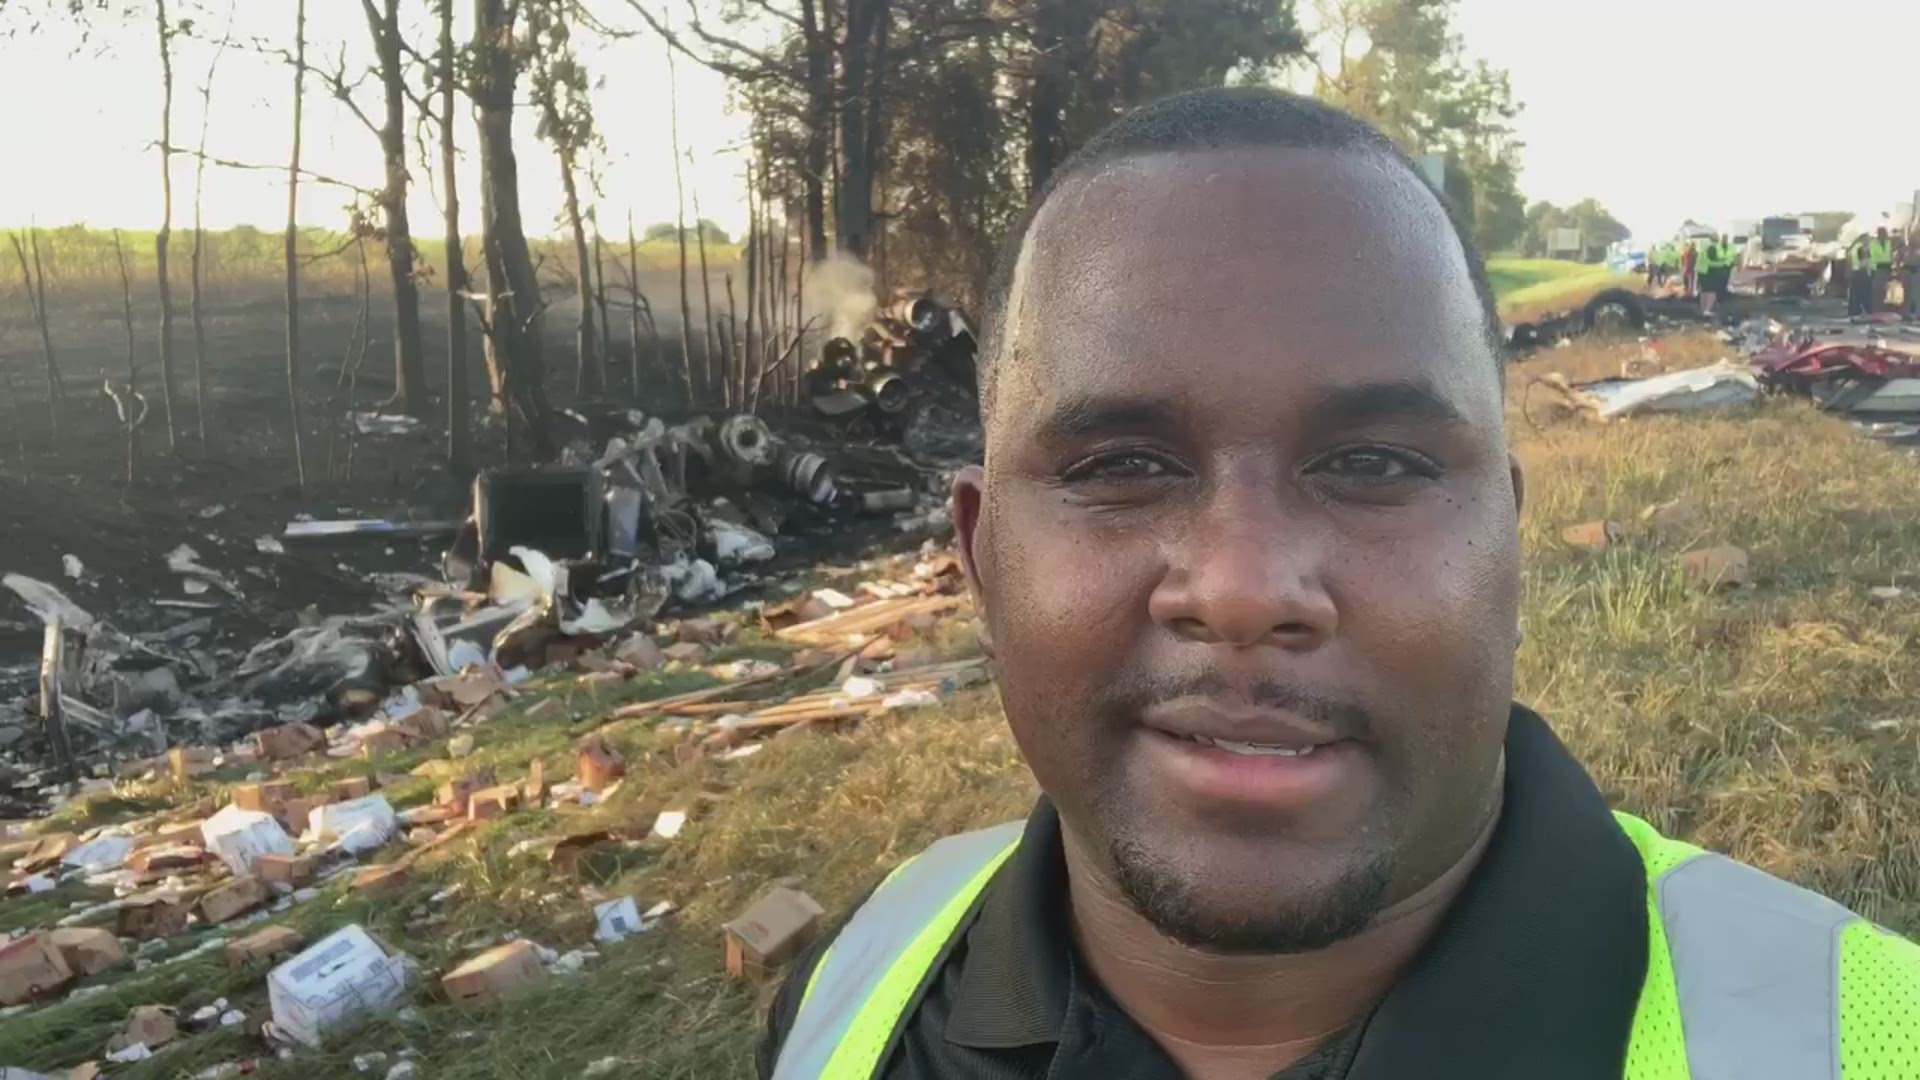 One person was killed in a fiery crash on I-75 southbound in Lake City. Florida Highway Patrol says the crash, which happened near Mile Maker 413, involved three semi-trailers and an SUV.